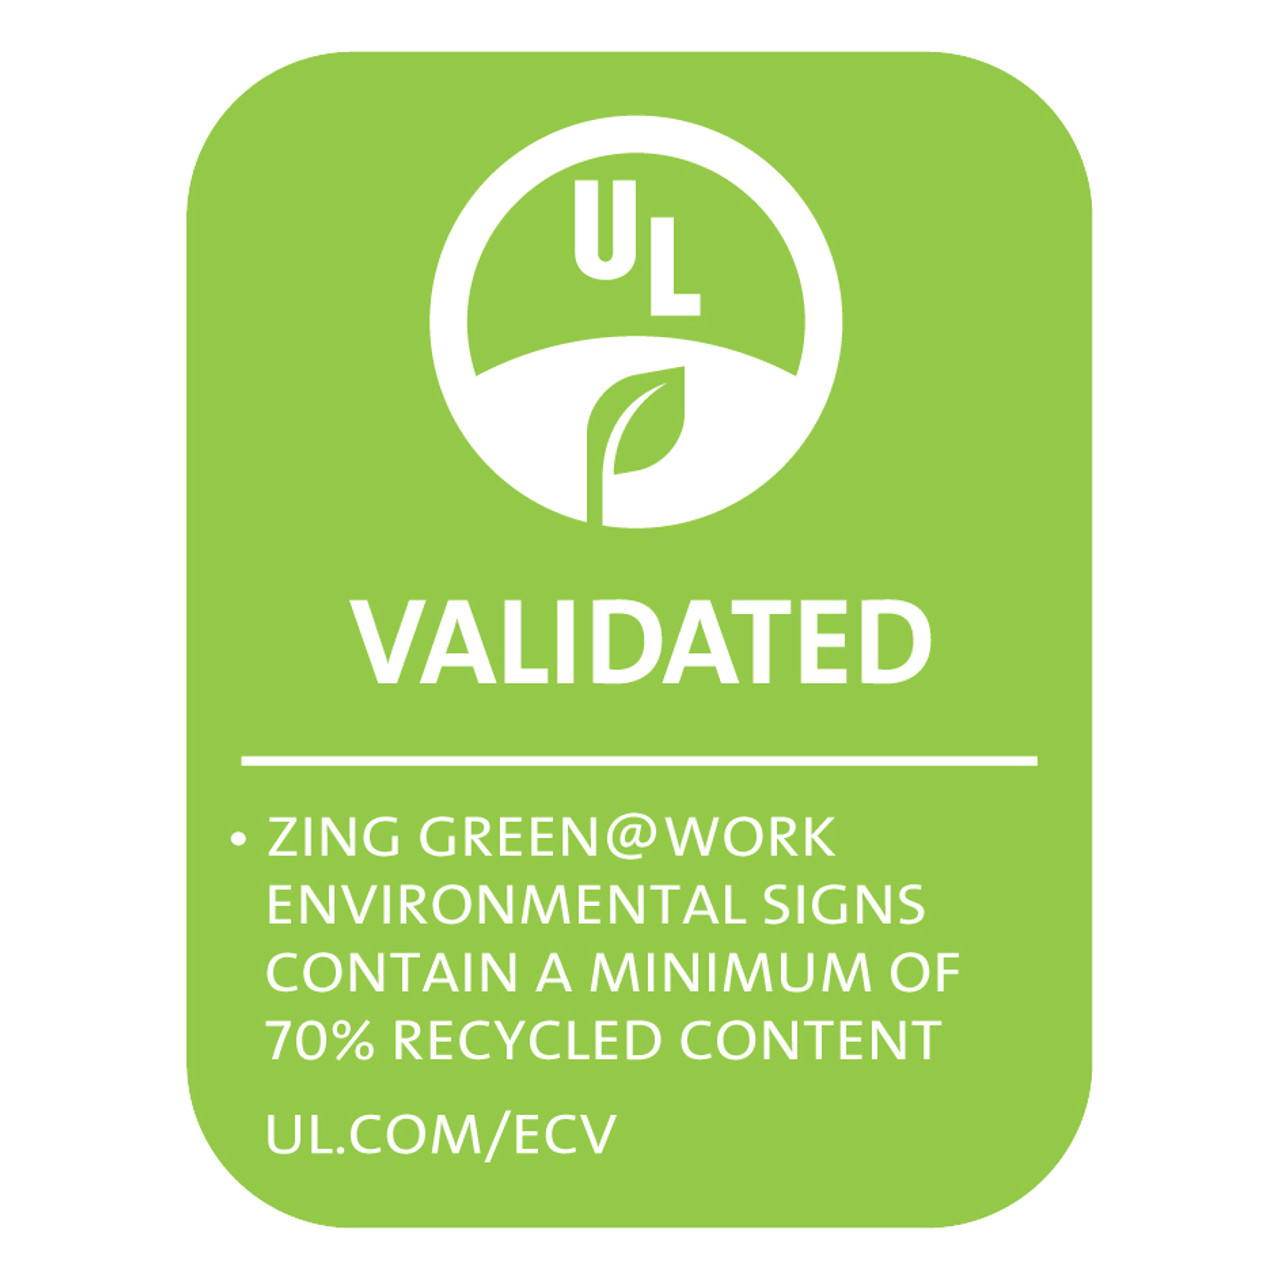 UL Validated Product for Recycled Content